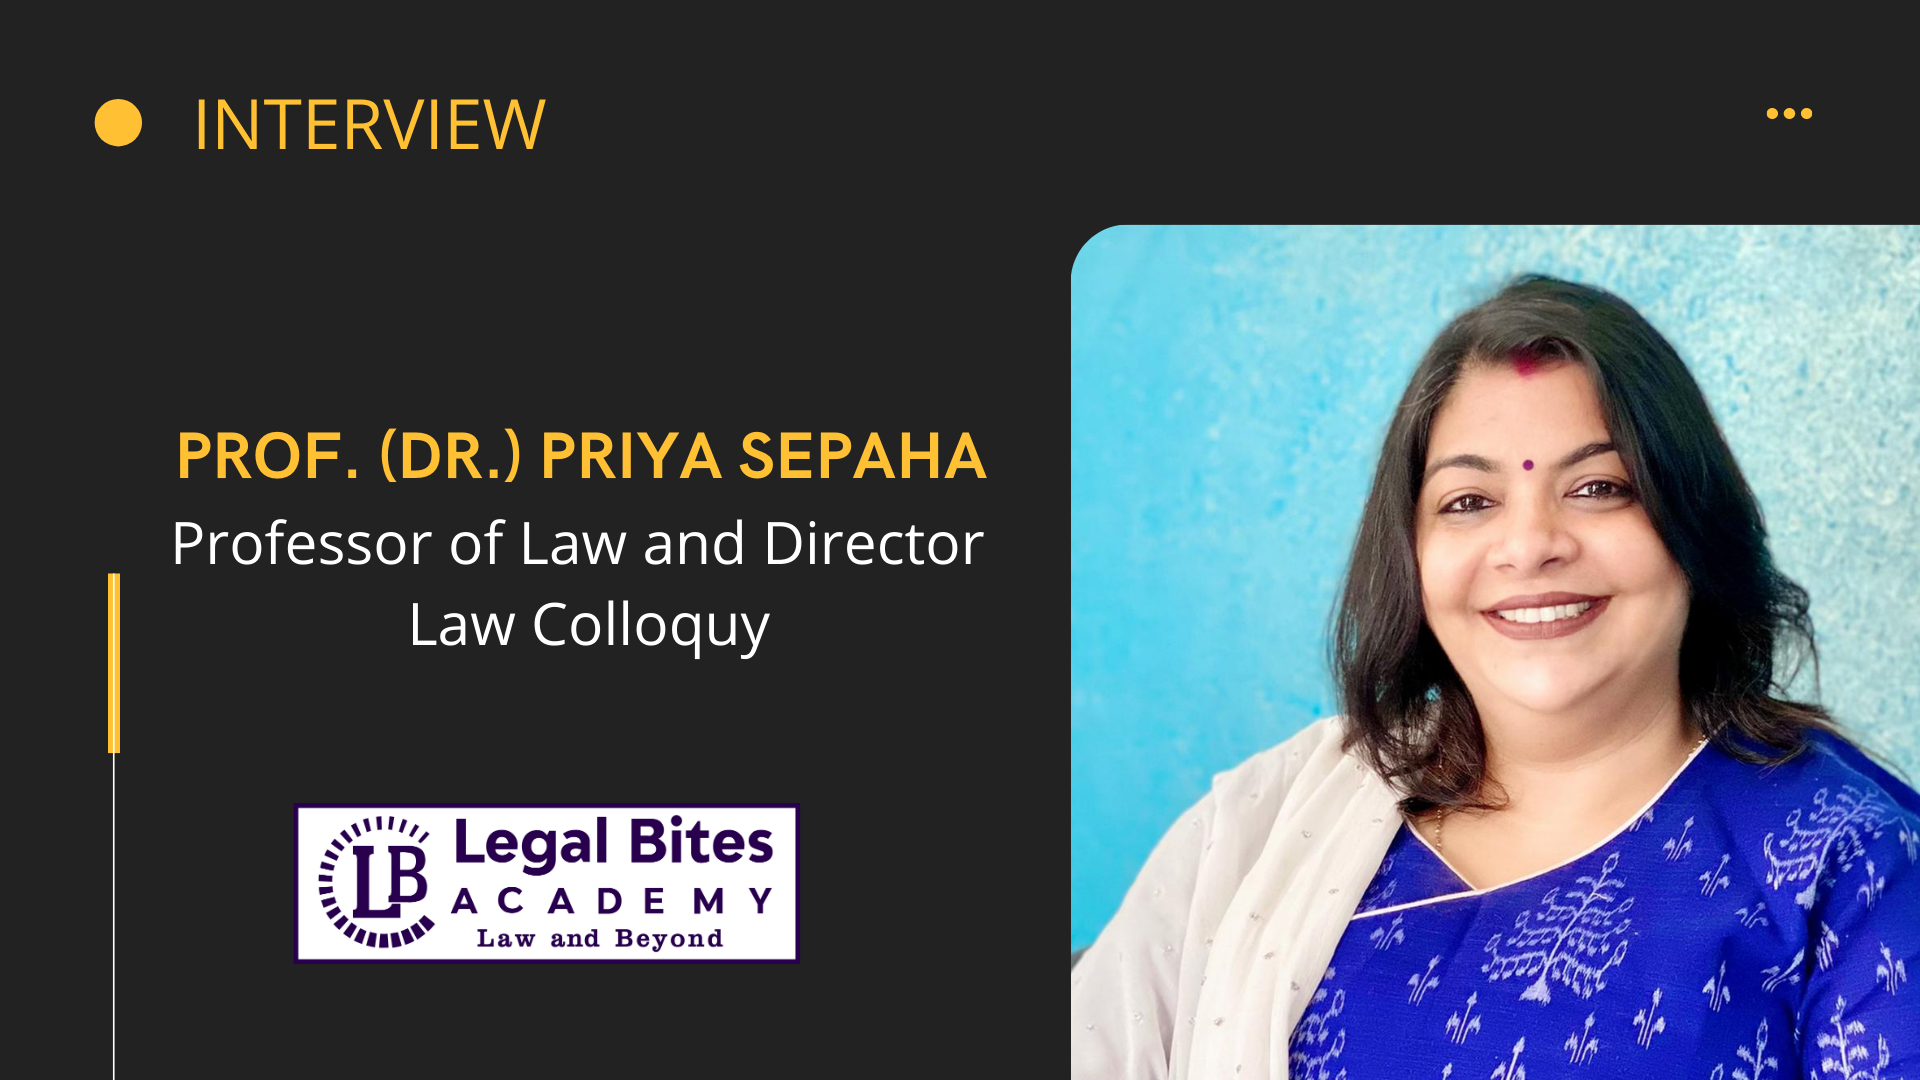 Interview: Prof. (Dr.) Priya Sepaha, Professor of Law and Director, Law Colloquy